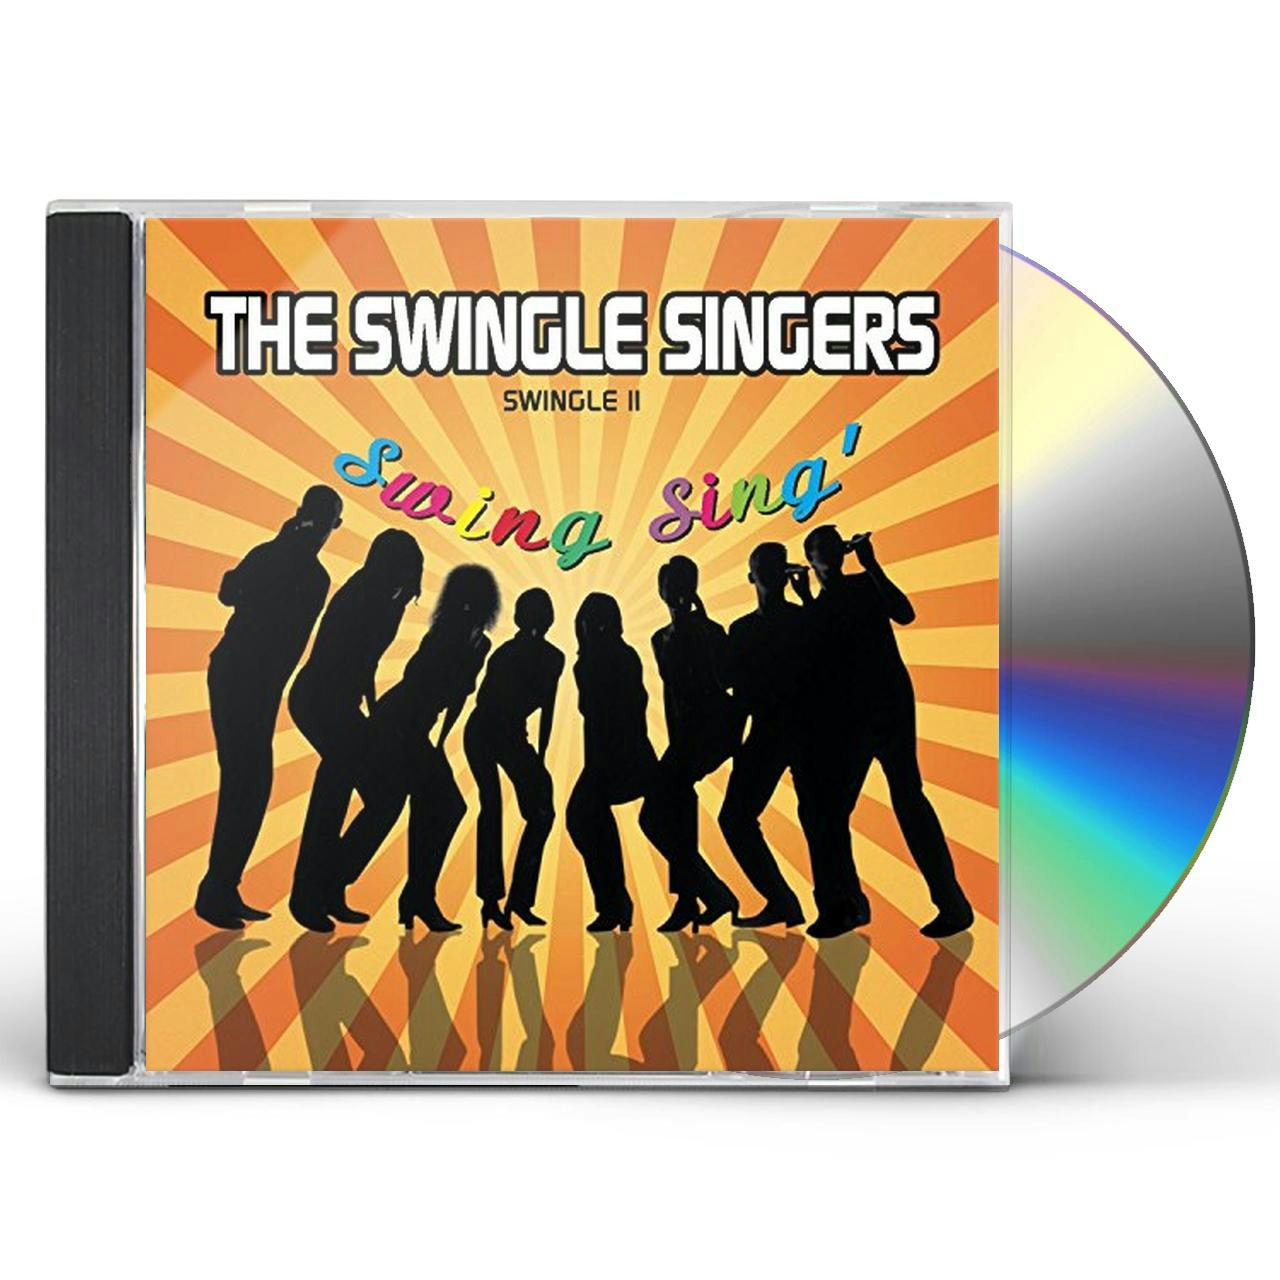 The Swingle Singers SWING SING CD photo picture